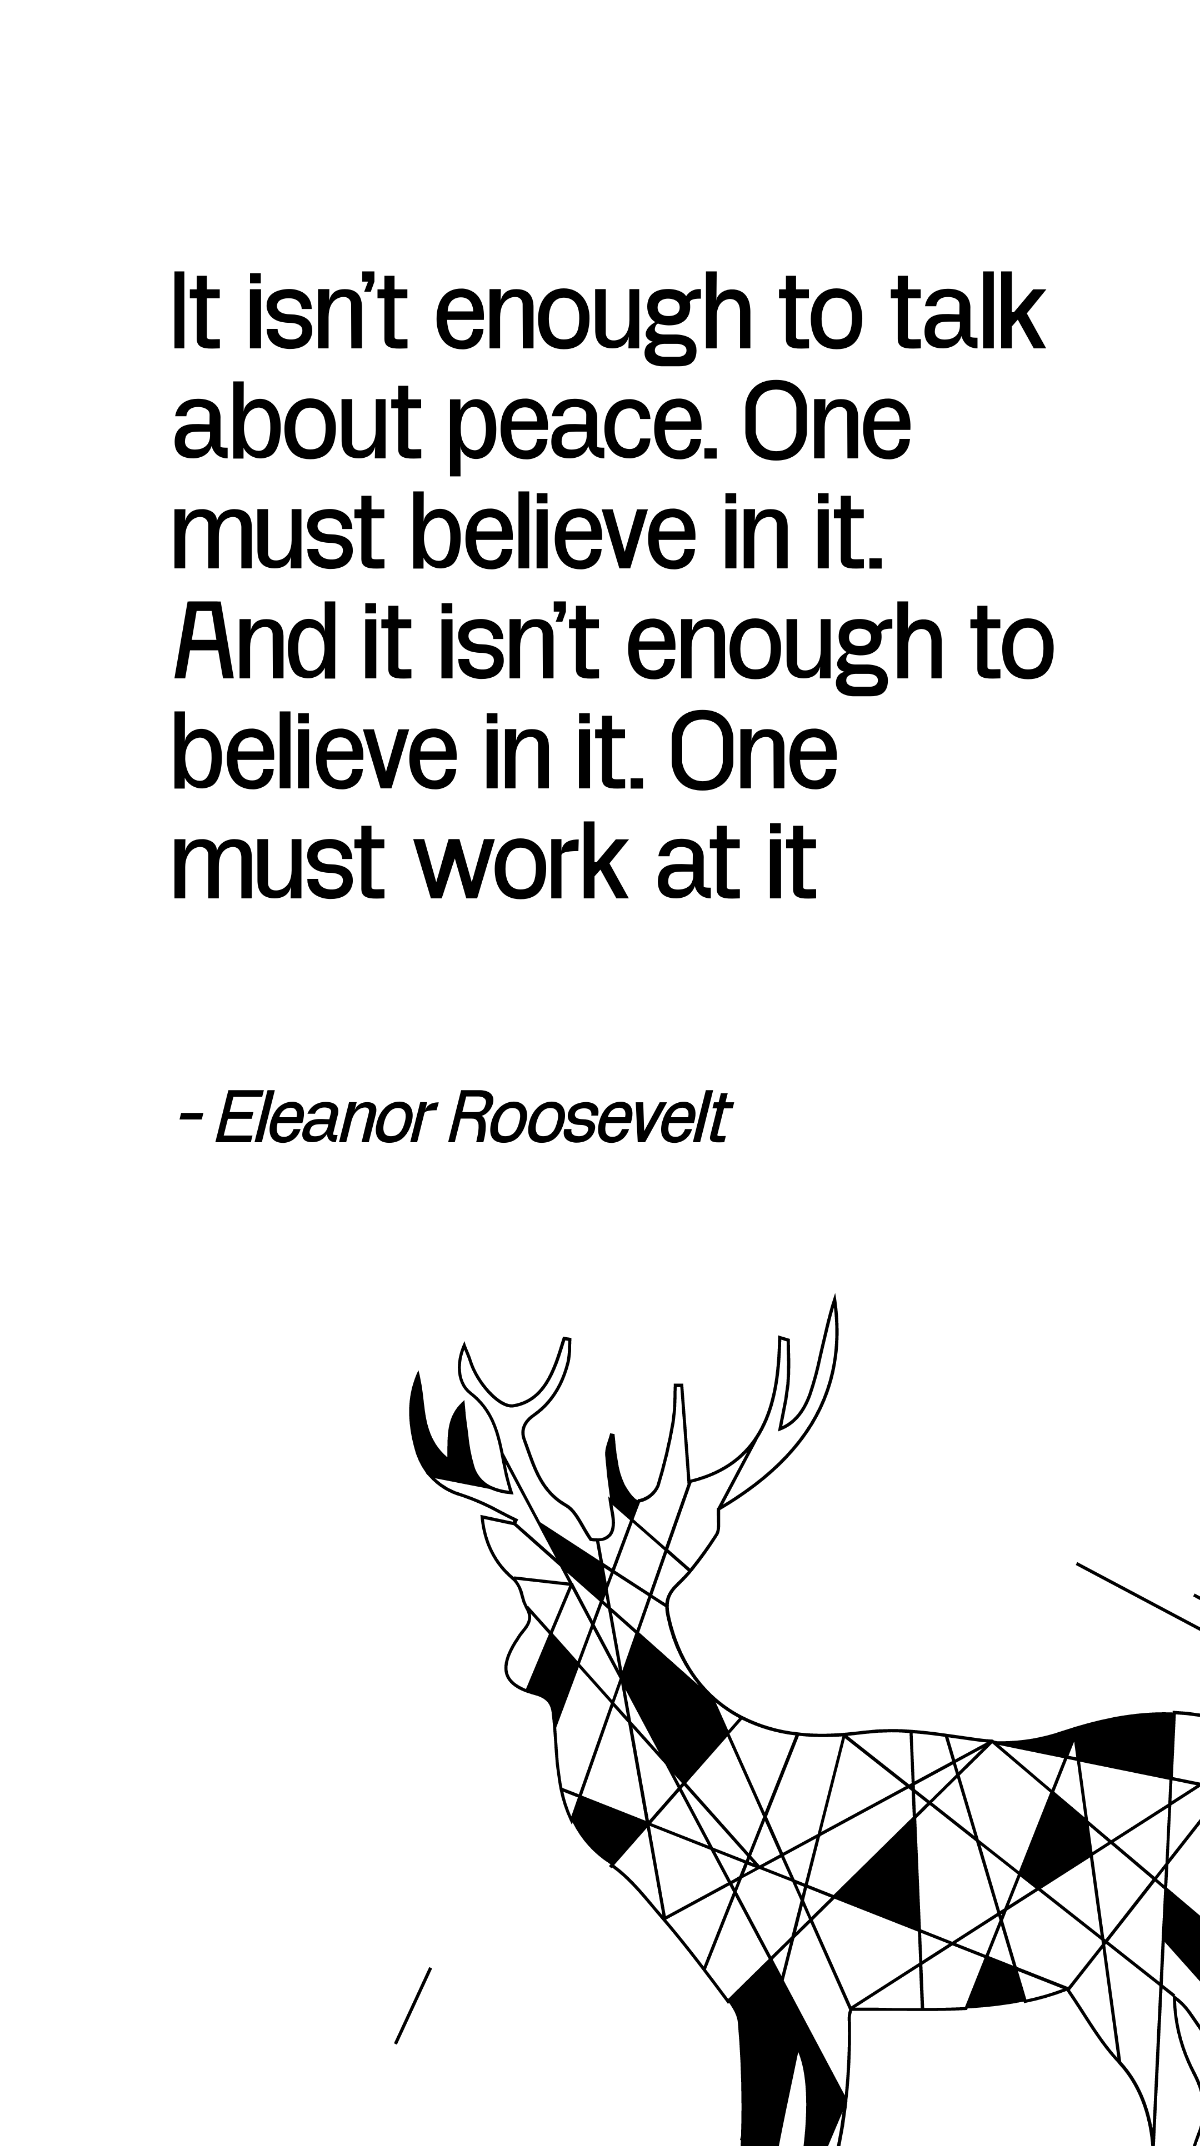 Free Eleanor Roosevelt - It isn't enough to talk about peace. One must believe in it. And it isn't enough to believe in it. One must work at it Template